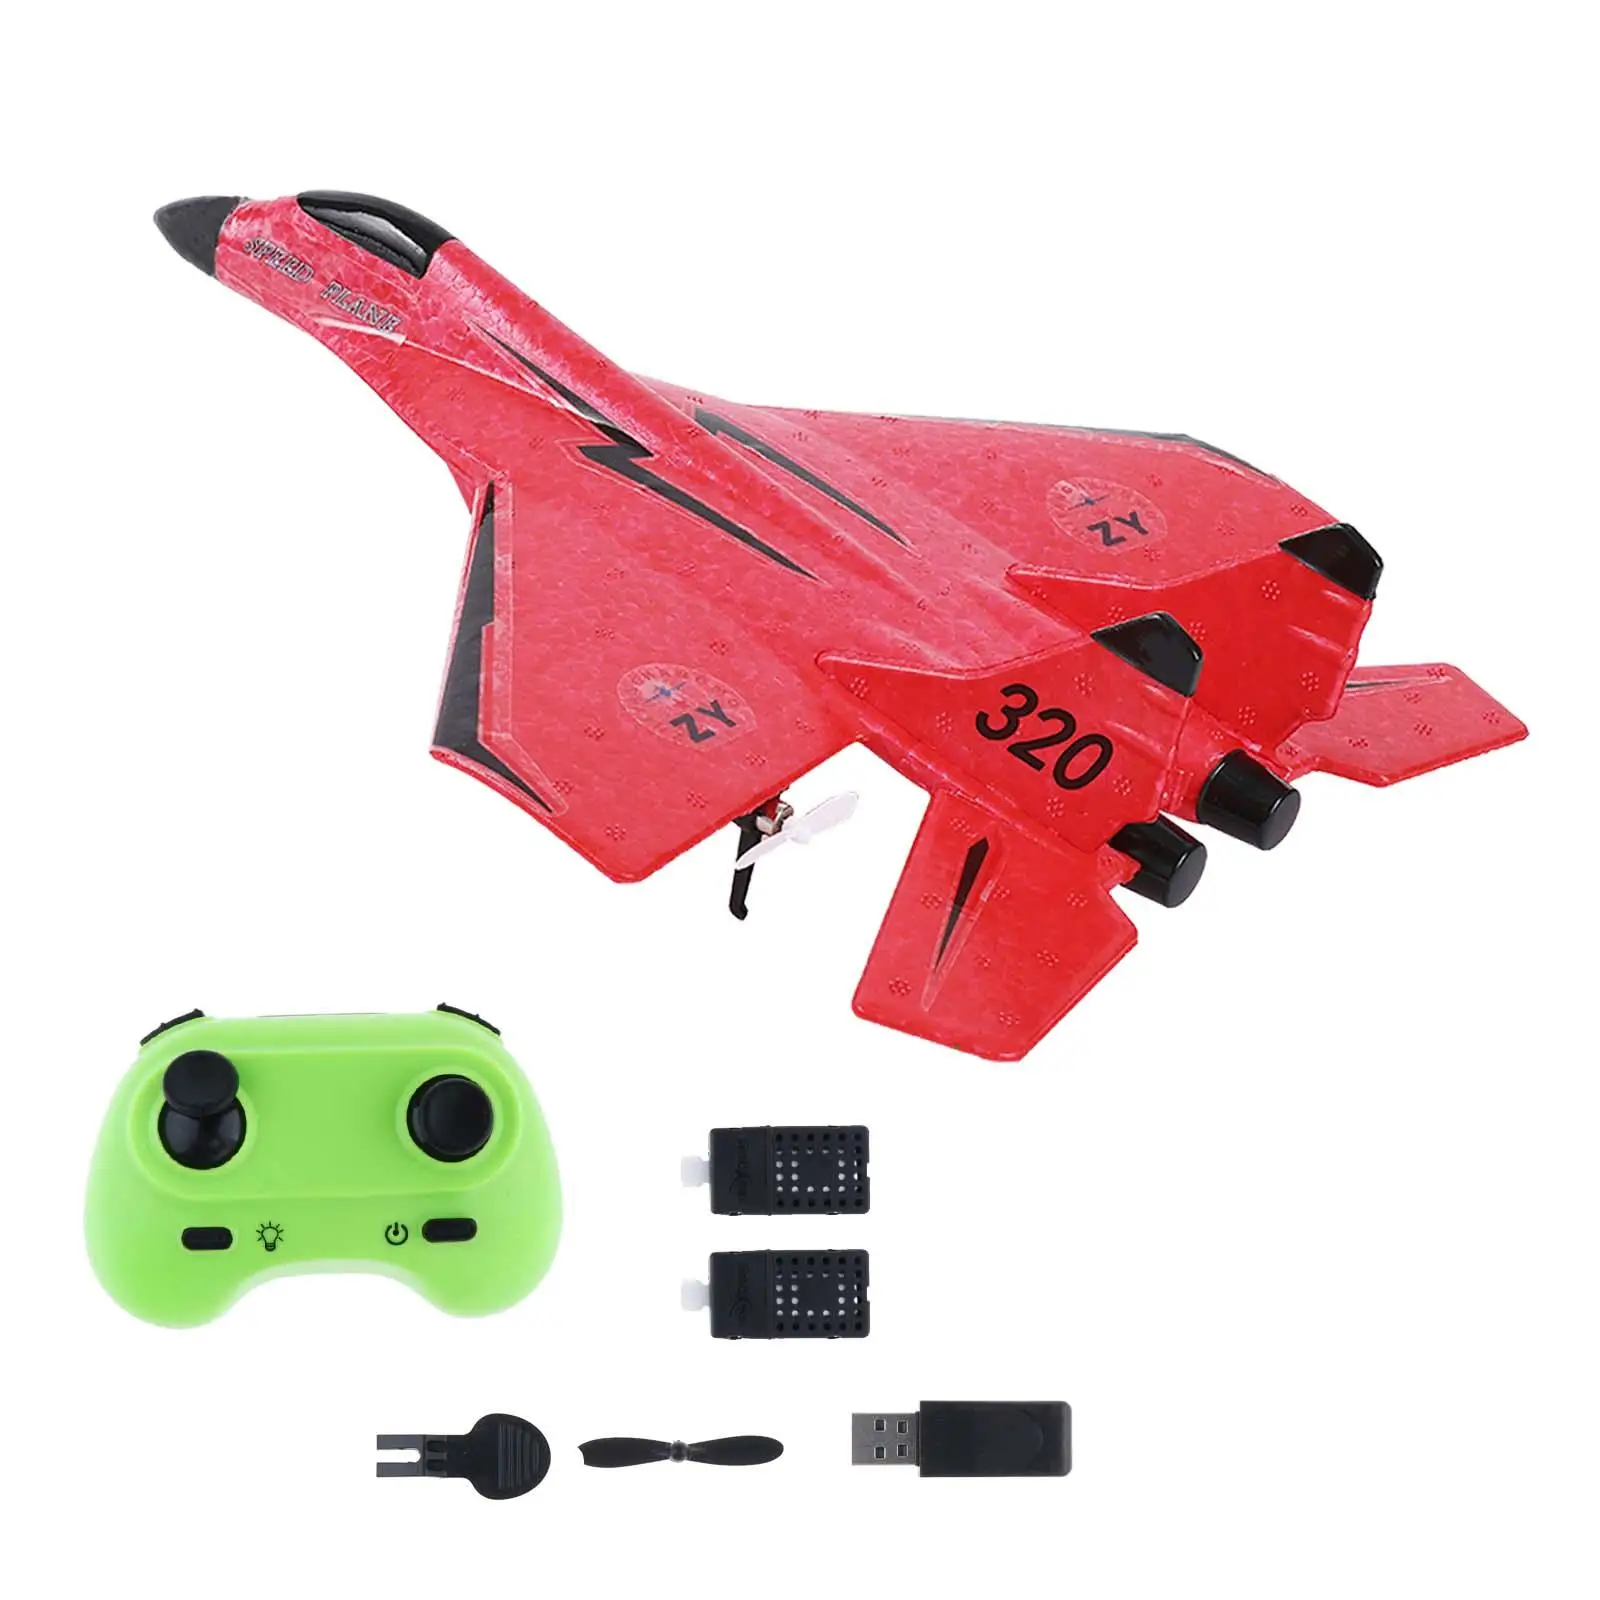 2CH RC Plane with LED Cool Light Ready to Fly Portable Outdoor Toys 2.4G Hobby RC Glider for Boys Girls Adults Beginner Kids